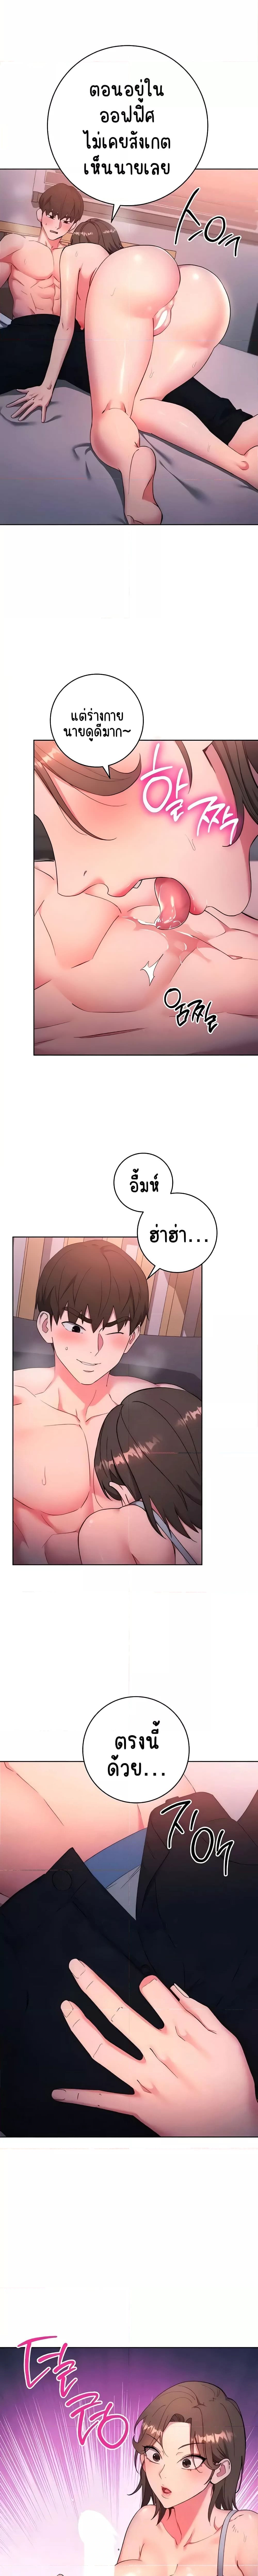 Outsider: The Invisible Man ตอนที่ 8 ภาพ 3